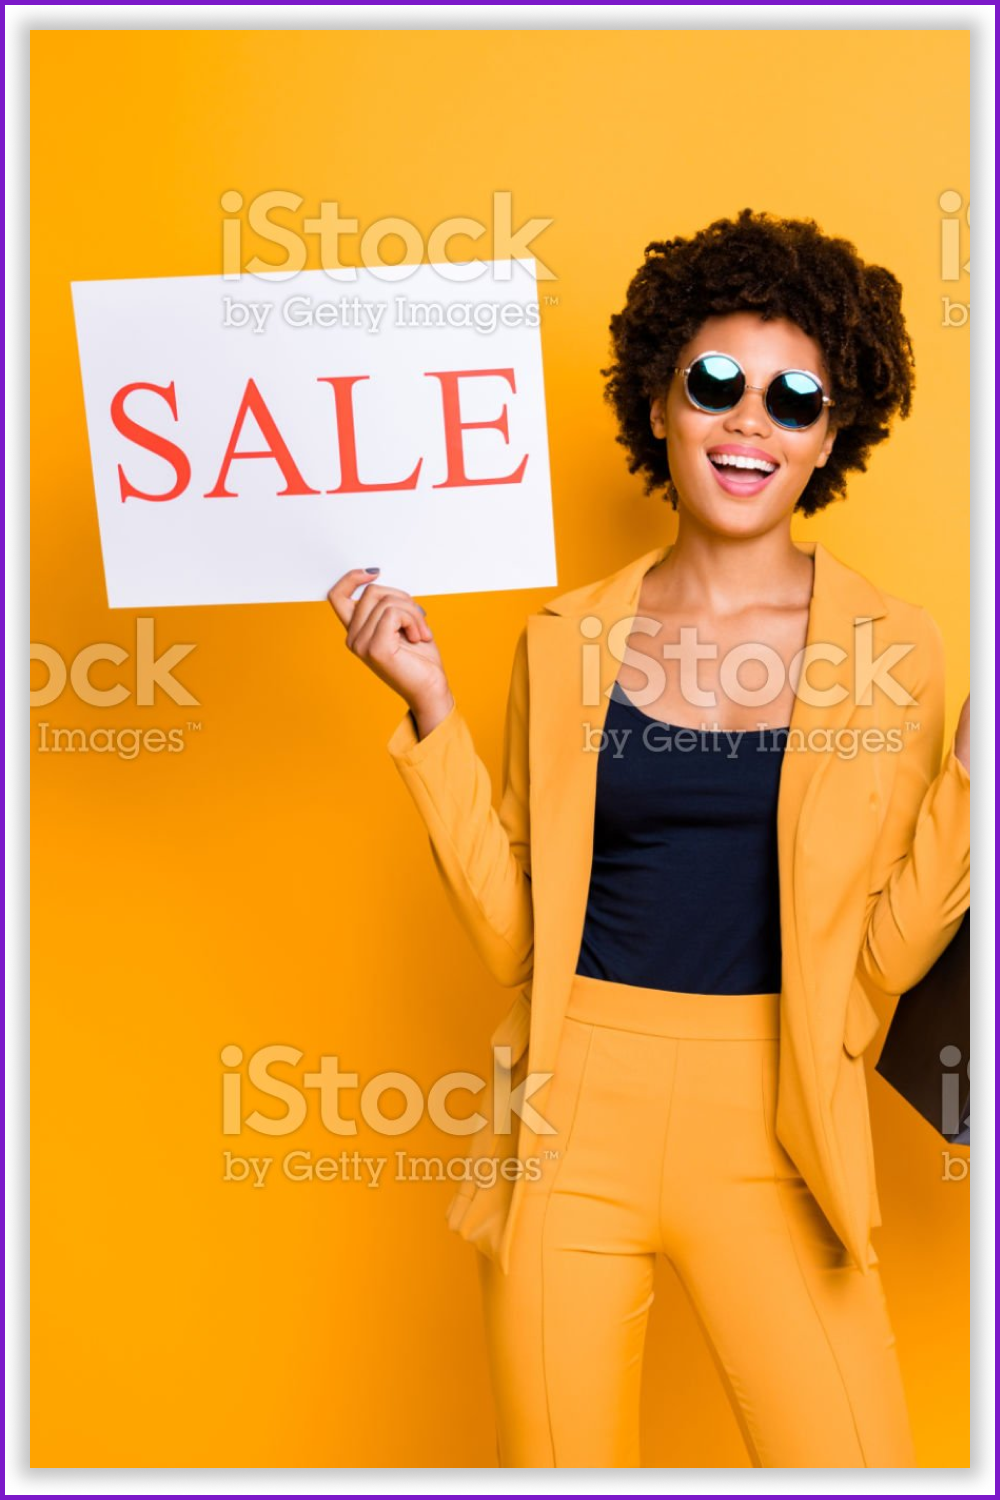 Woman in yellow with sign “Sale” on the bright orange background.